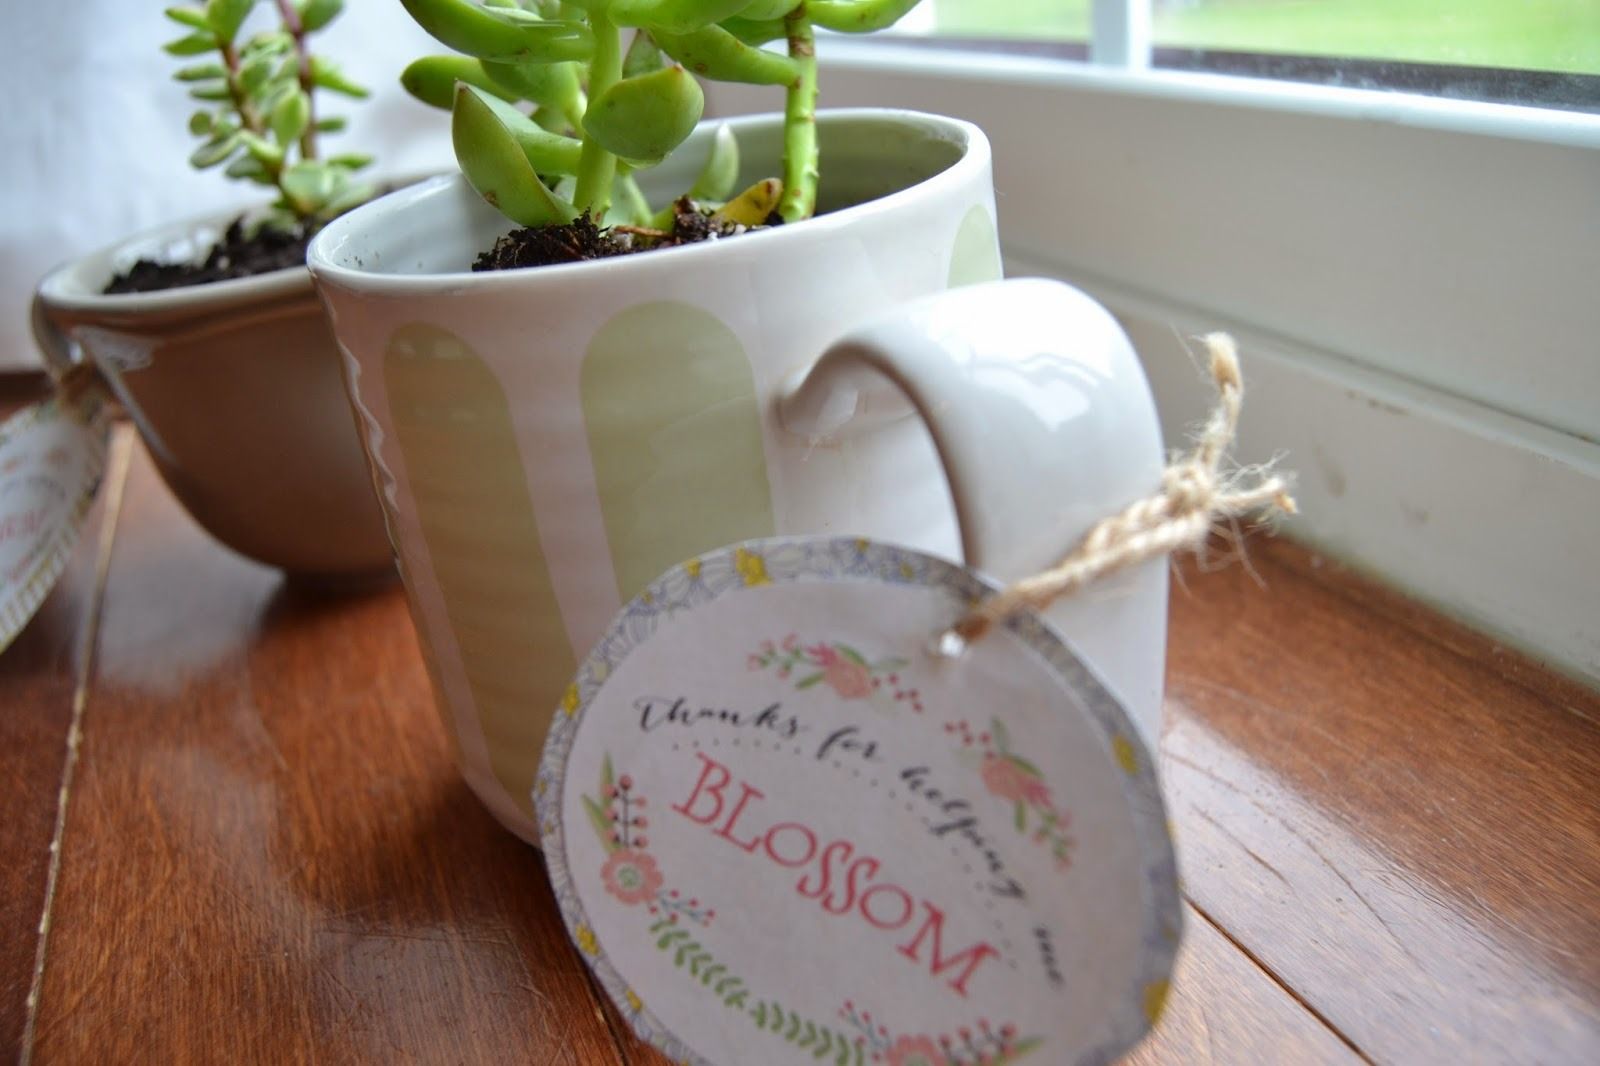 Last minute Mother's Day gift: A plant in a coffee mug from Lauren Rae & Co. Free printable from I Heart Naptime